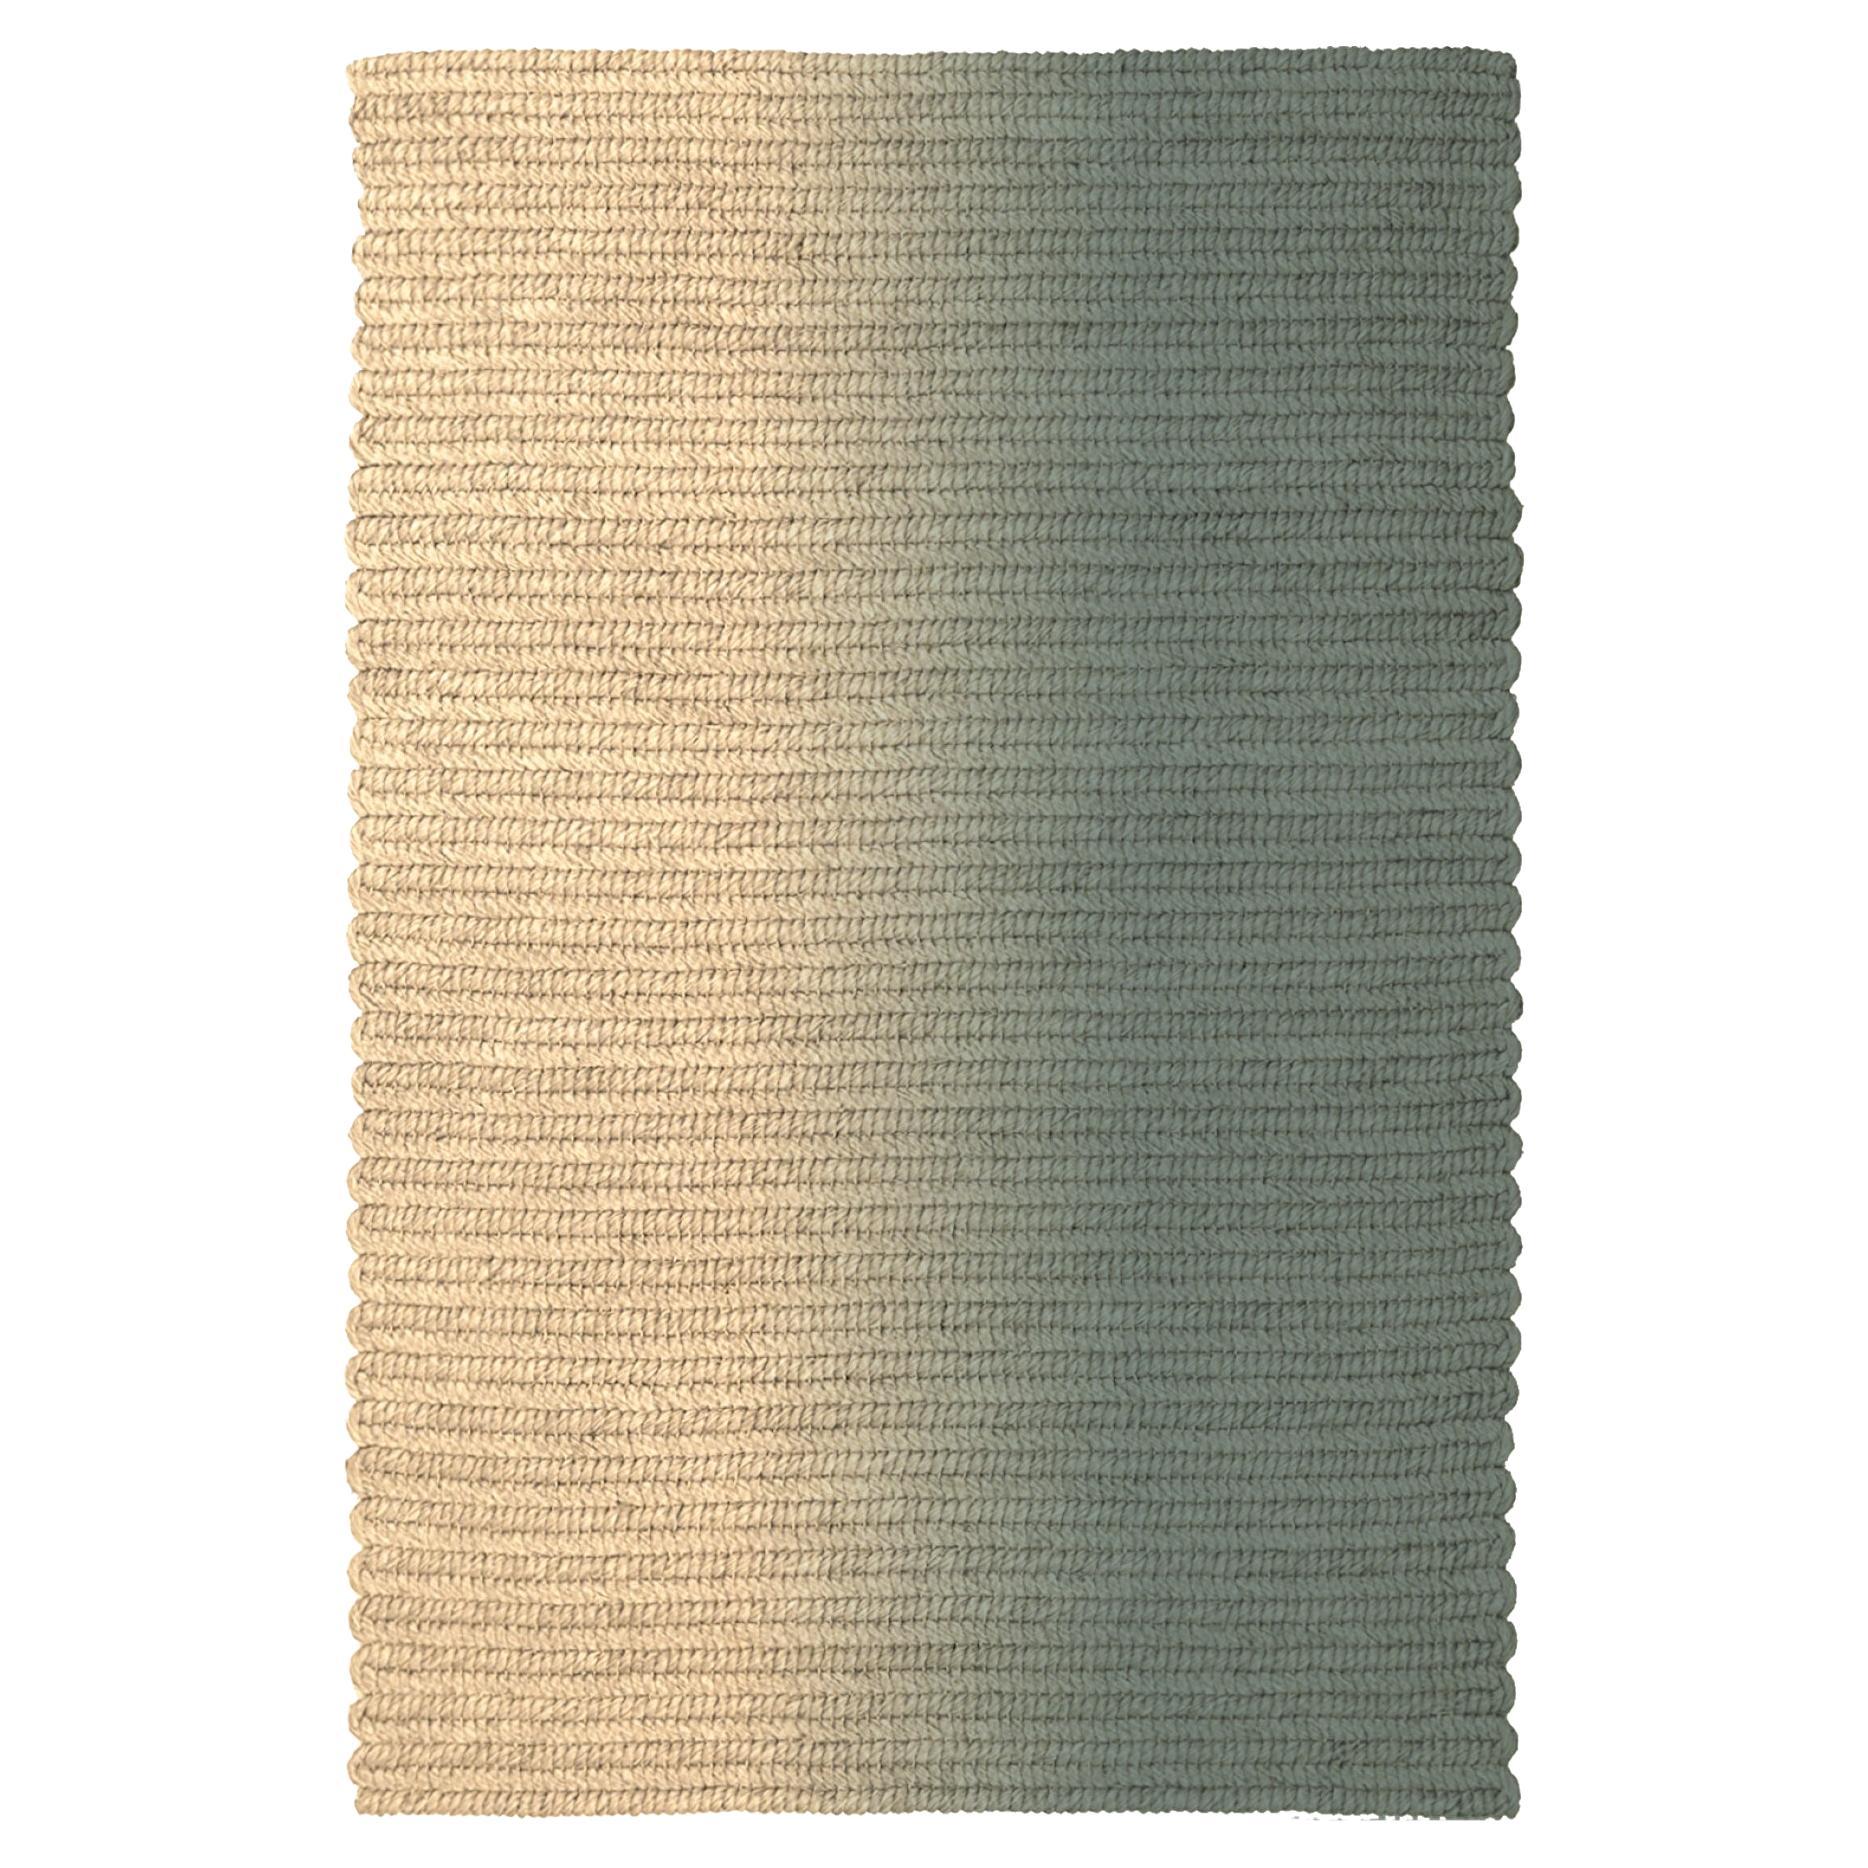 Claire Vos for Musett 'Switch' Abaca Indoor Rug in Caffe Latte, in 160 x 240 cm en vente